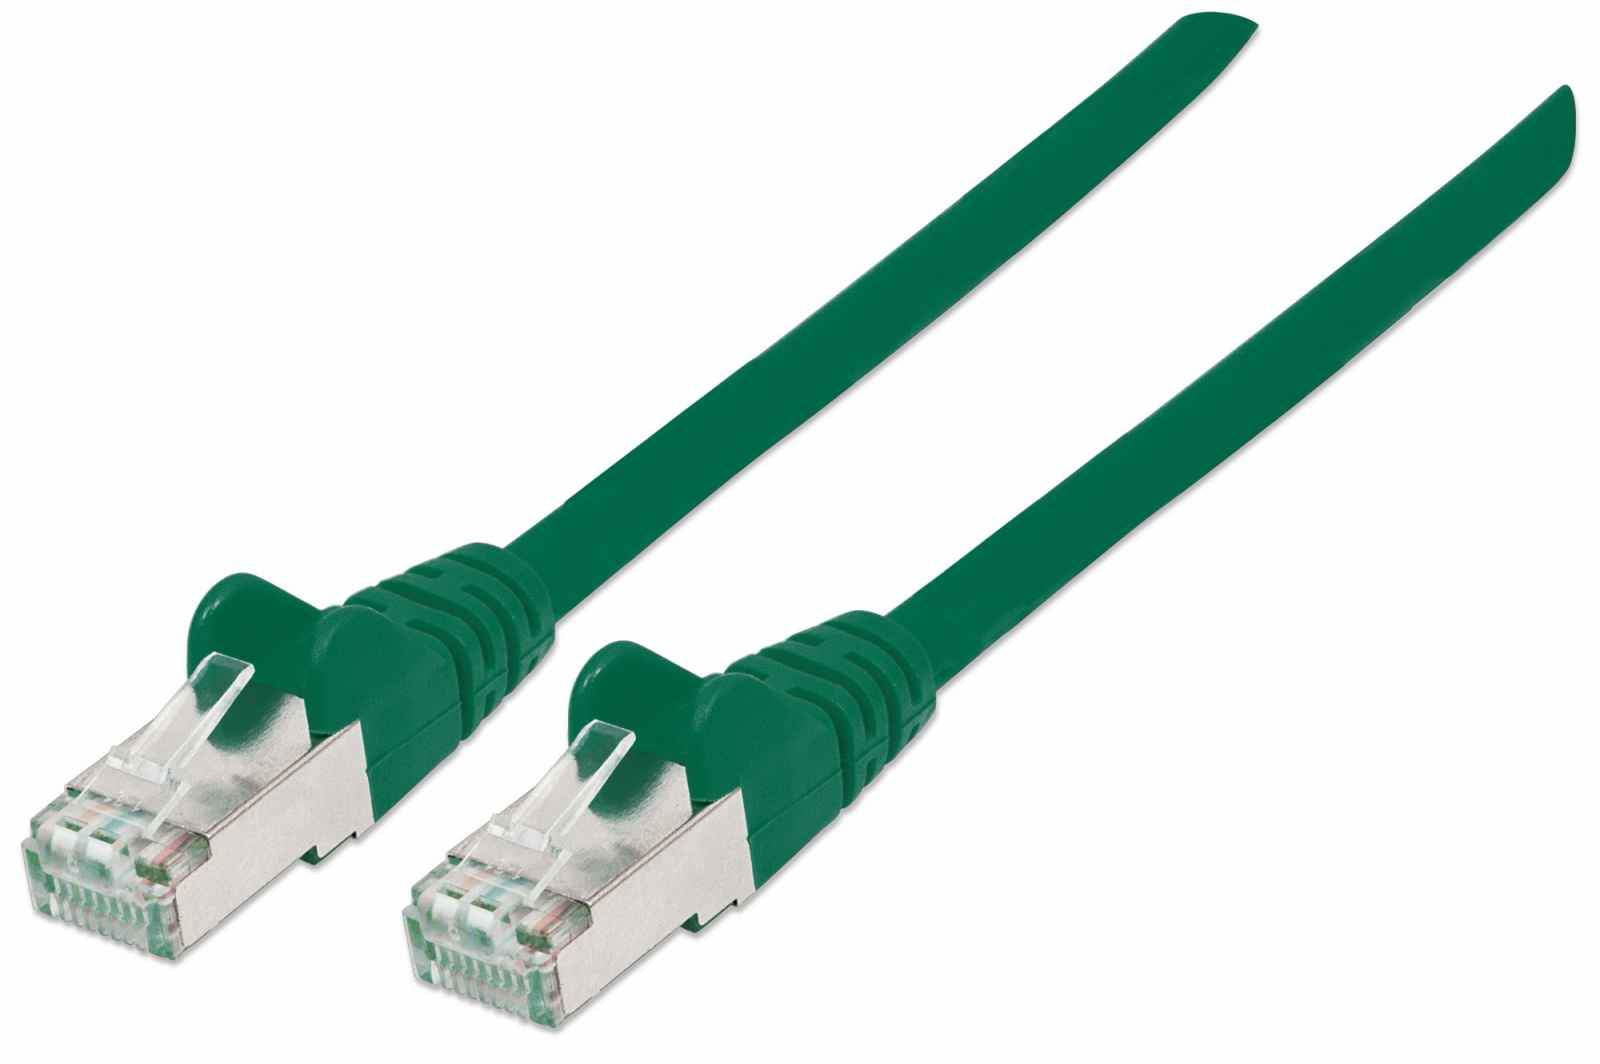 Intellinet Network Patch Cable, Cat7 Cable/Cat6A Plugs, 3m, Green, Copper, S/FTP, LSOH / LSZH, PVC, RJ45, Gold Plated Contacts, Snagless, Booted, Lifetime Warranty, Polybag